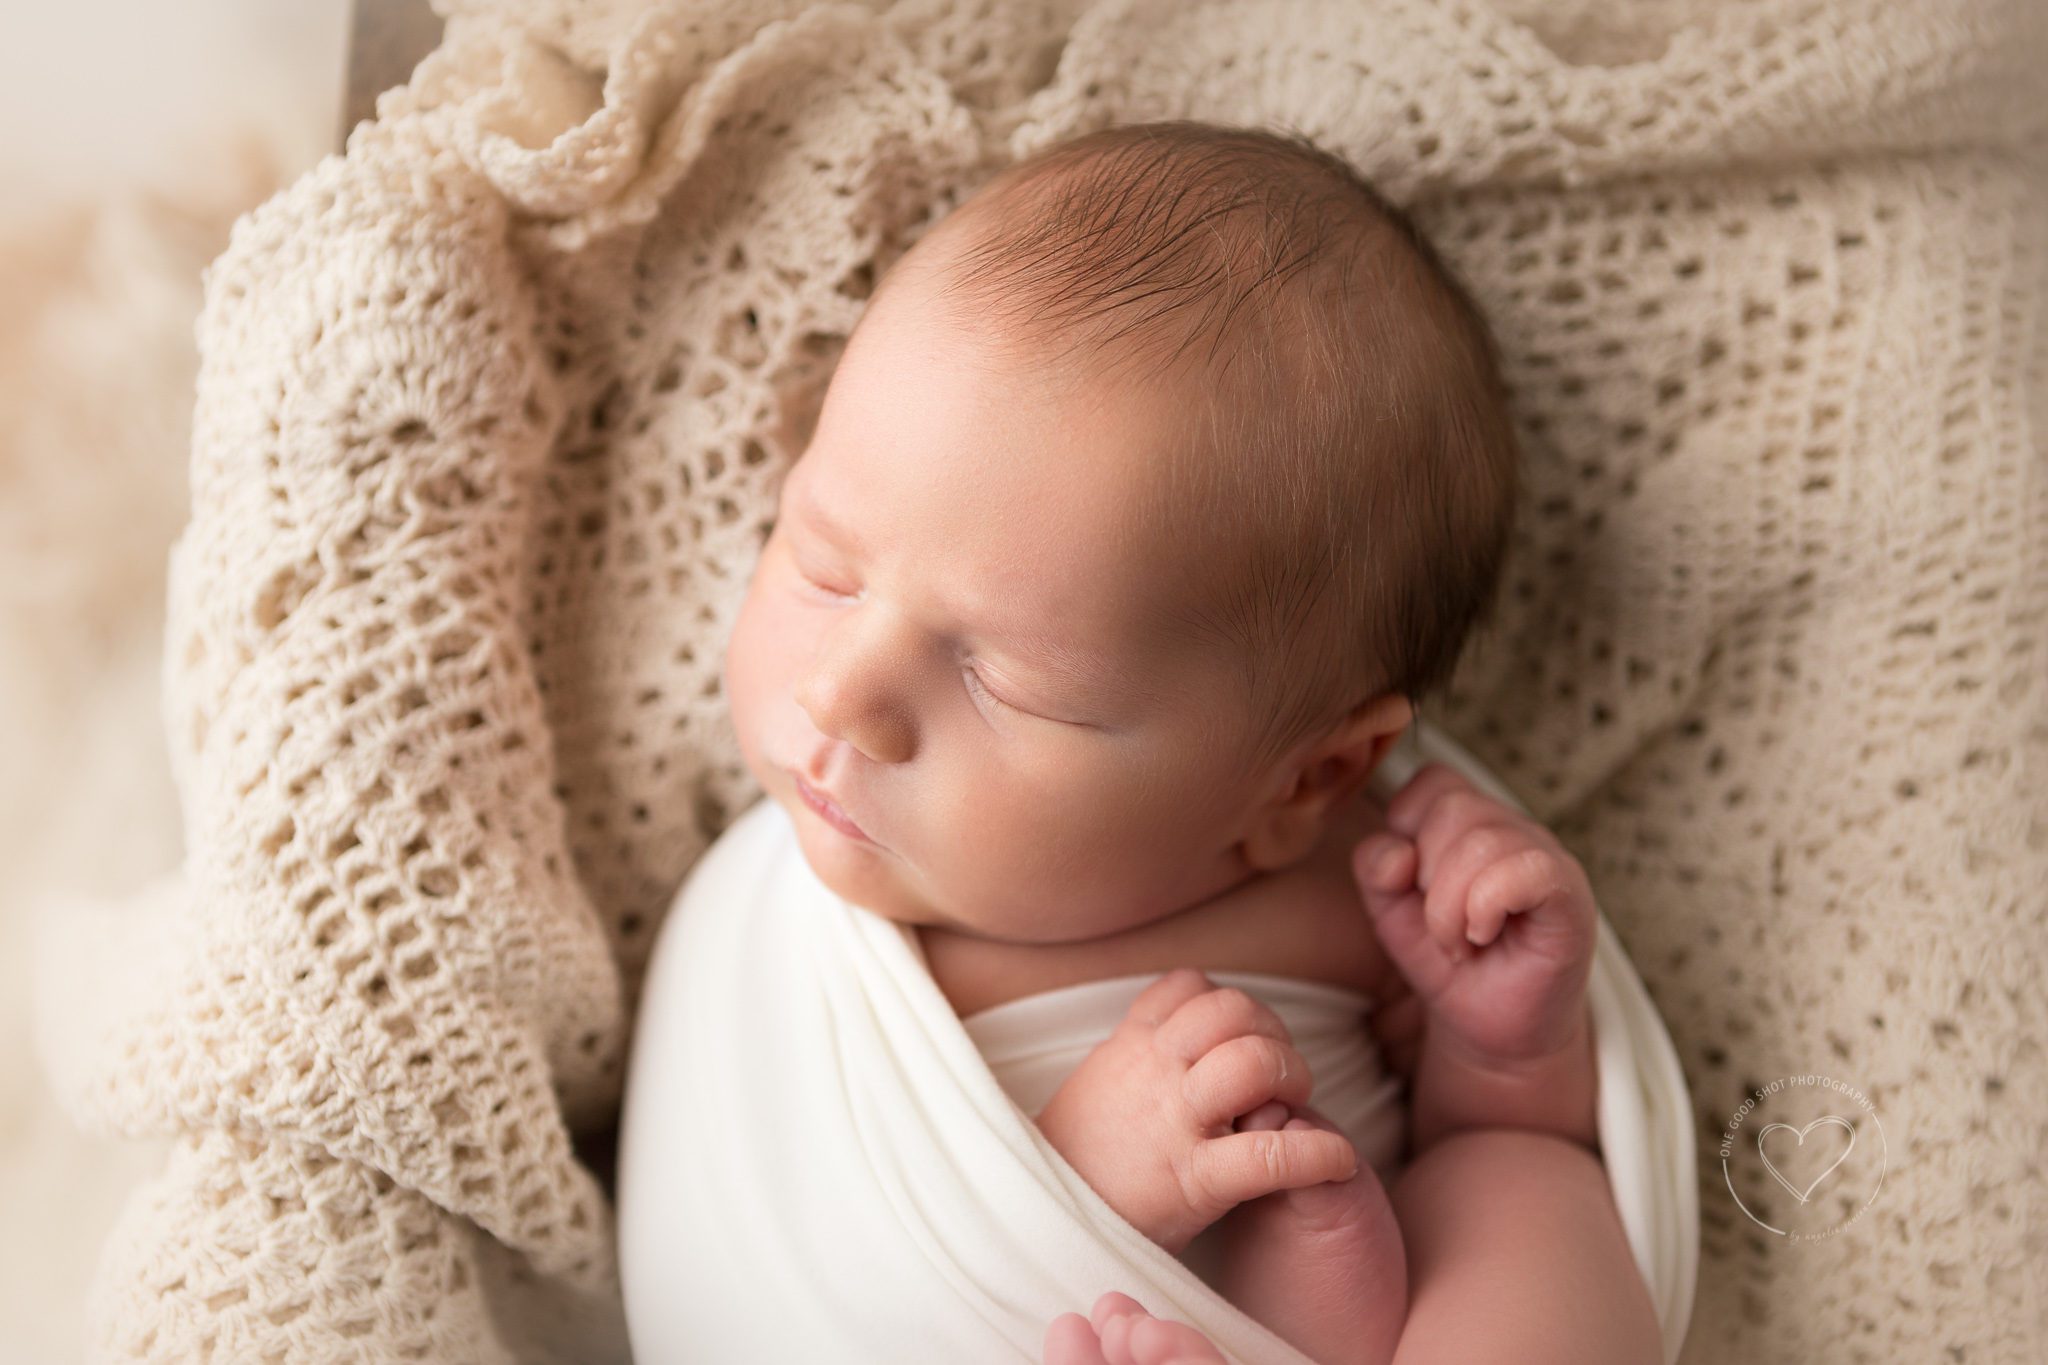 Newborn boy, wrapped in white, lying on vintage overlay, close up